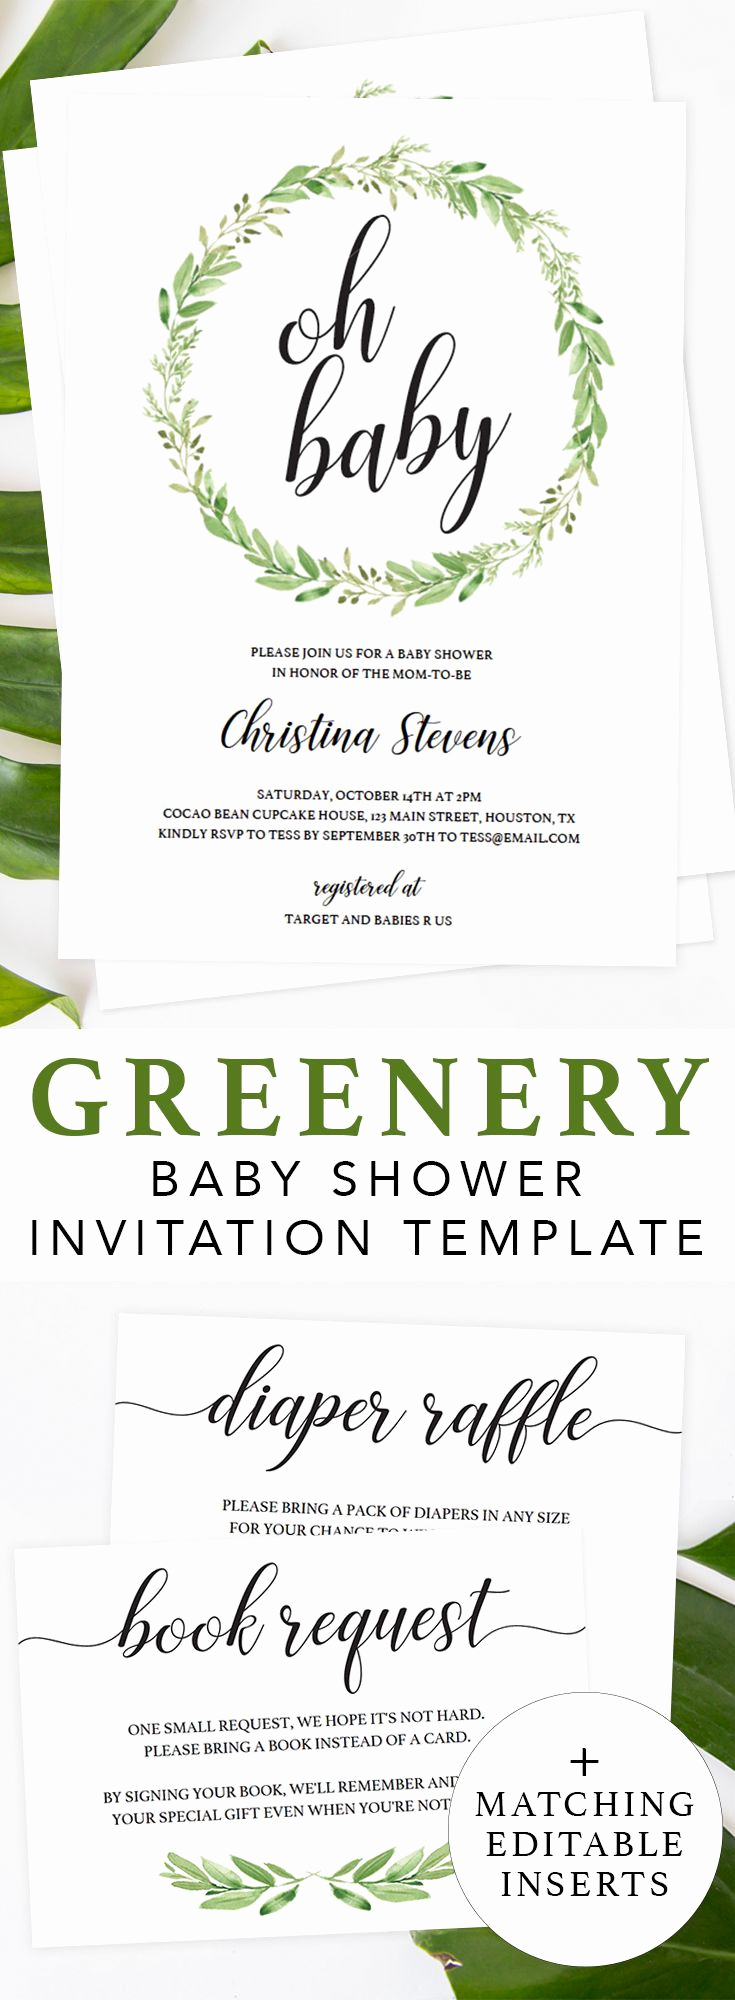 Baby Shower Invitation Template Beautiful Best 25 Green Baby Showers Ideas On Pinterest